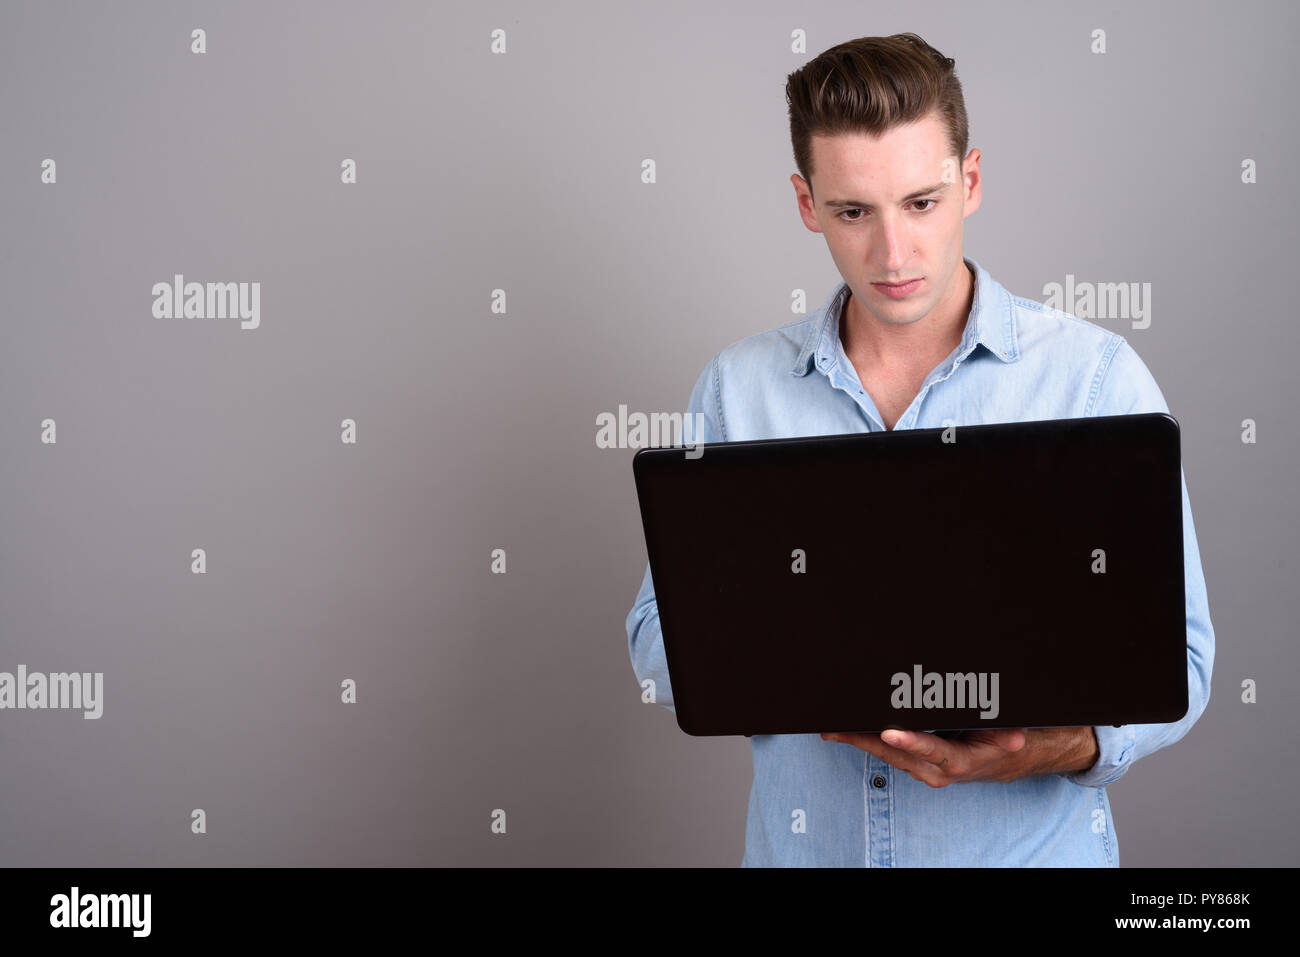 Young handsome man using laptop computer against gray background Stock Photo